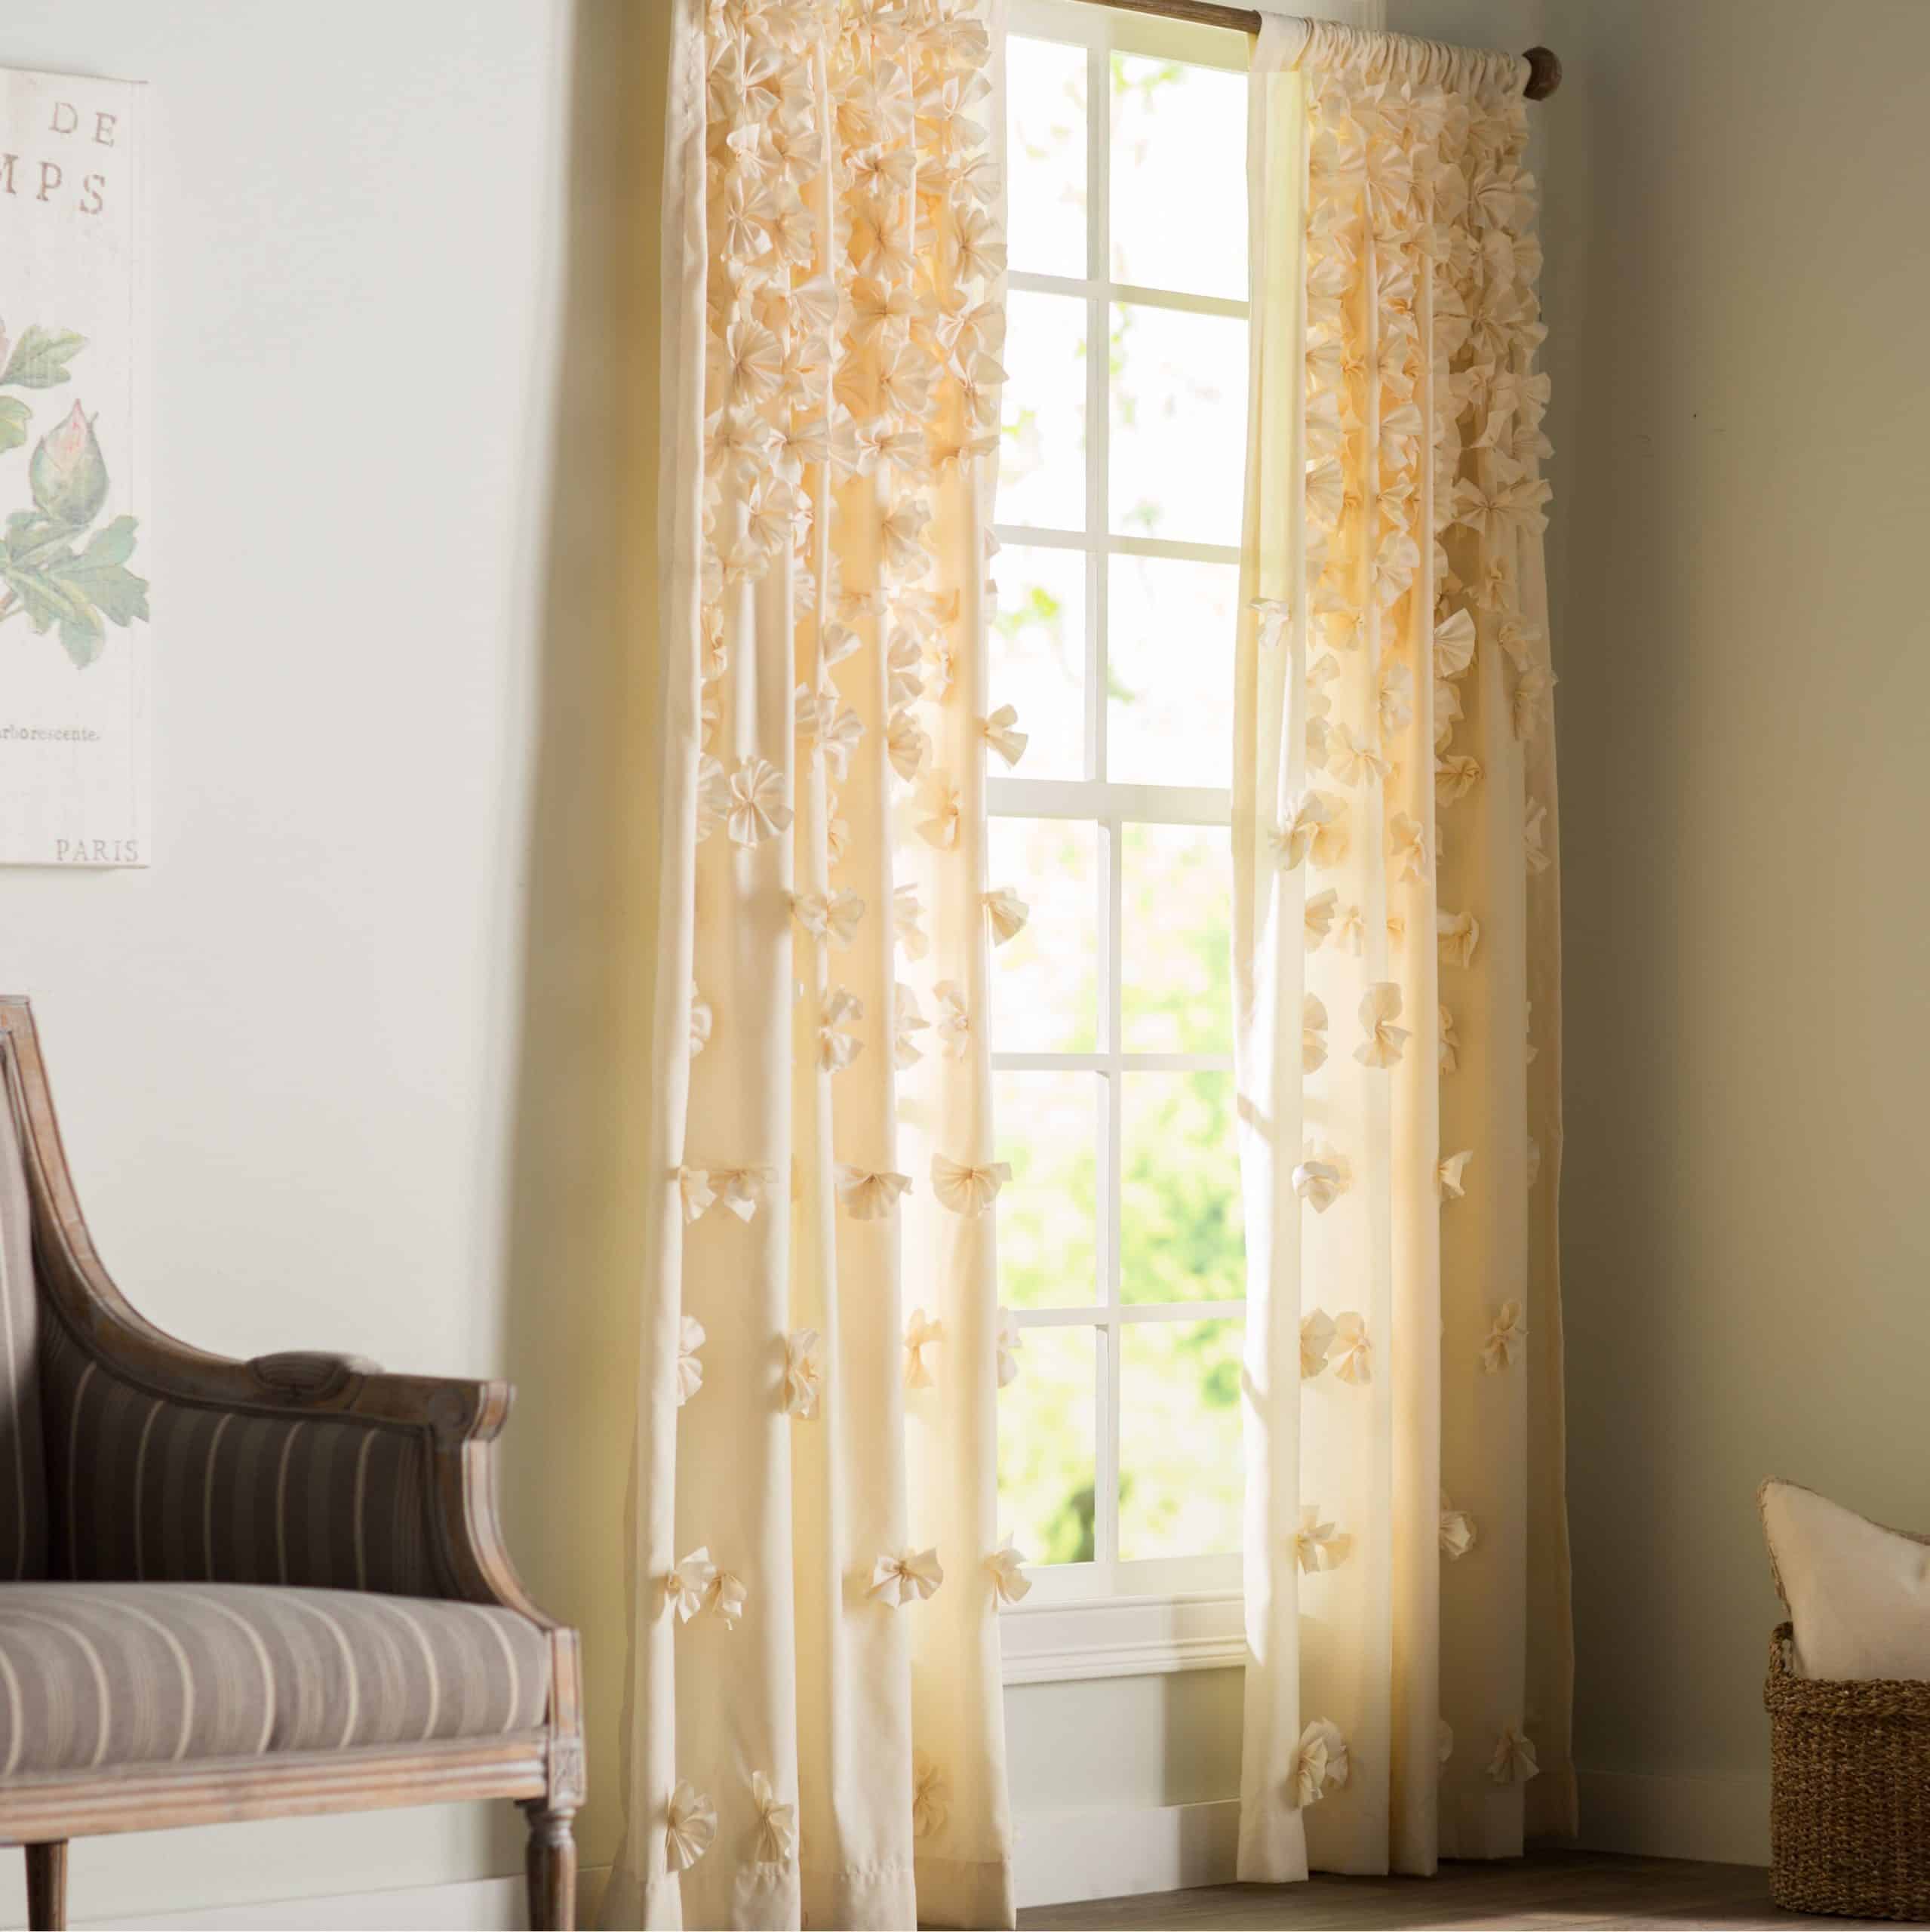 Get That Ethereal Glow With Sheer Peachy Curtains